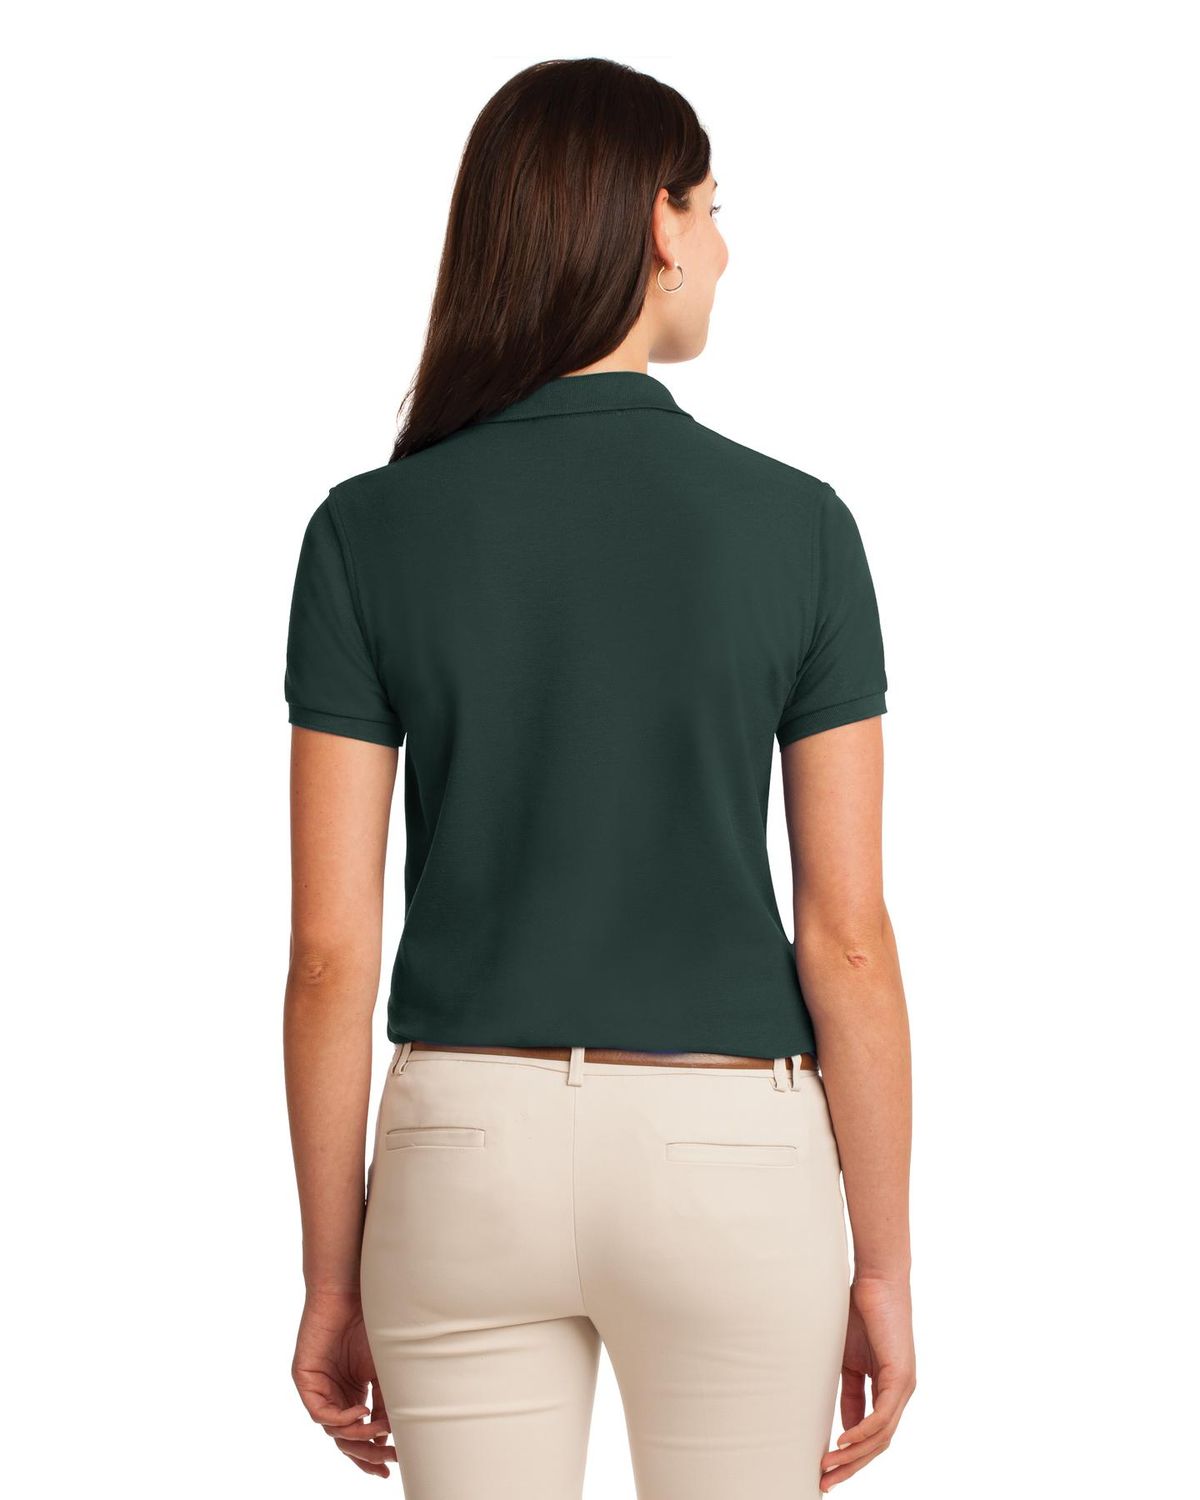 'Port Authority L500 Ladies Silk Touch Polo Shirt'